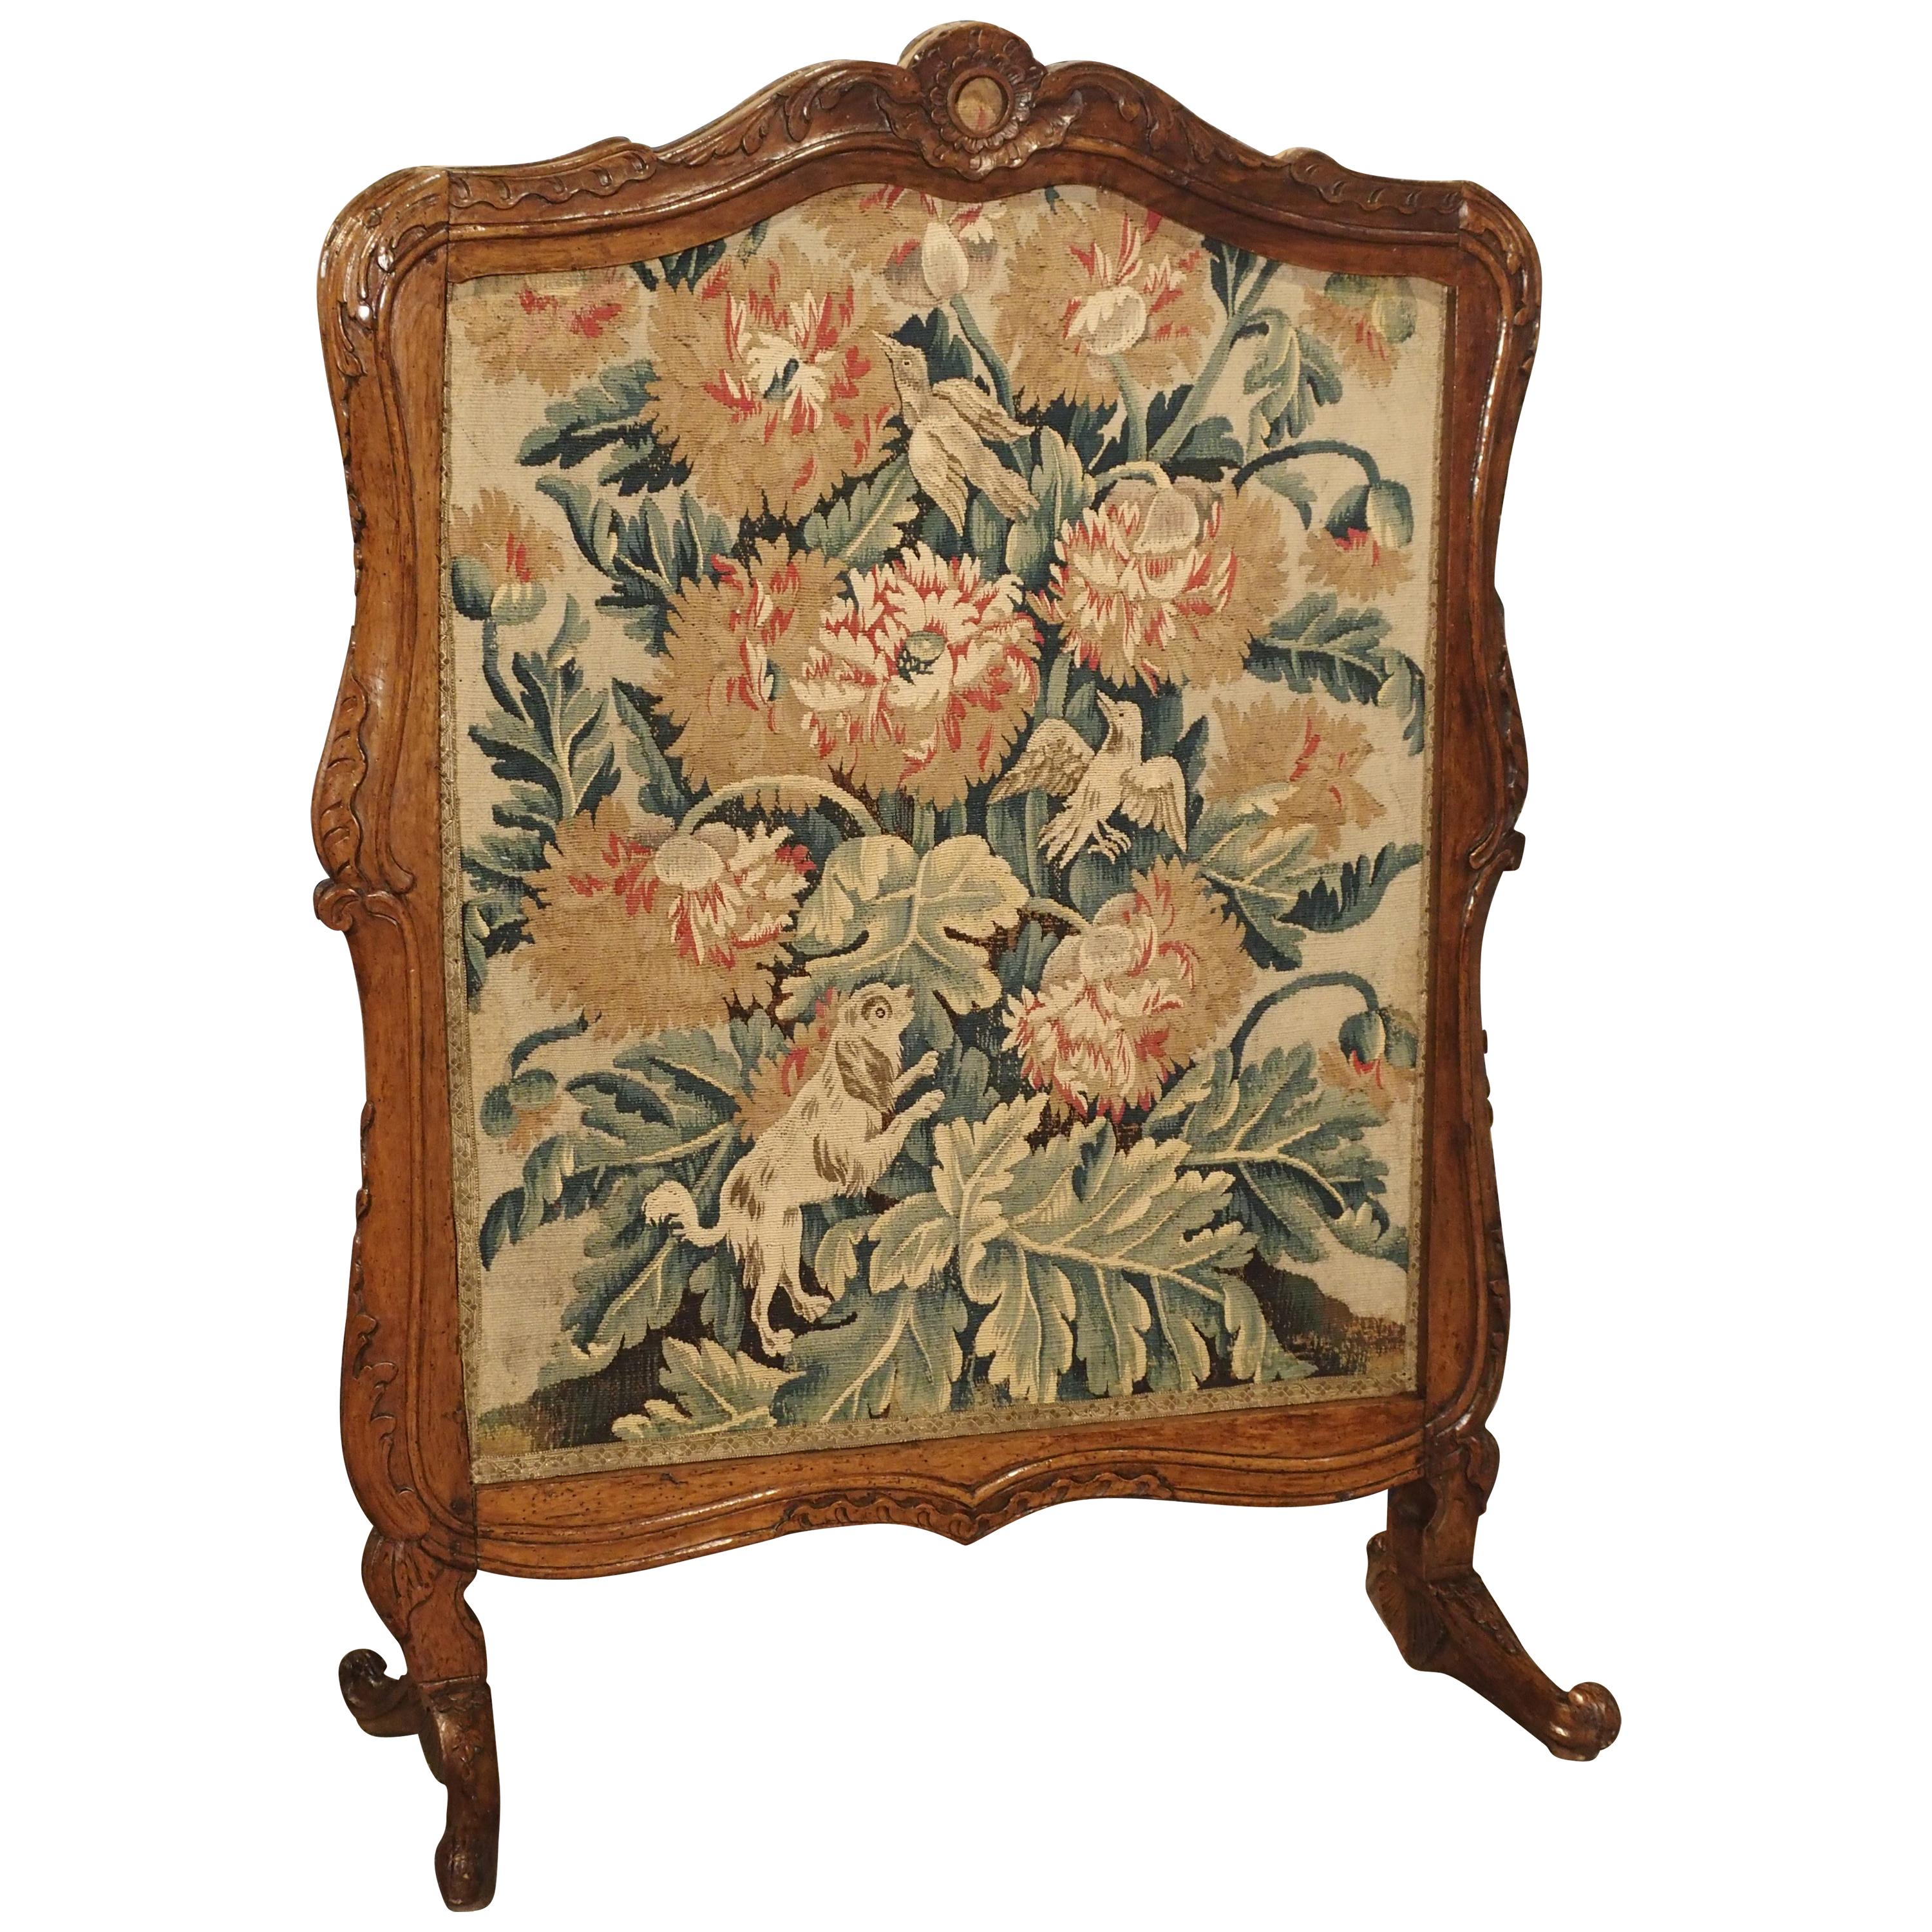 Period Louis XV Walnut Wood and Tapestry Firescreen from France